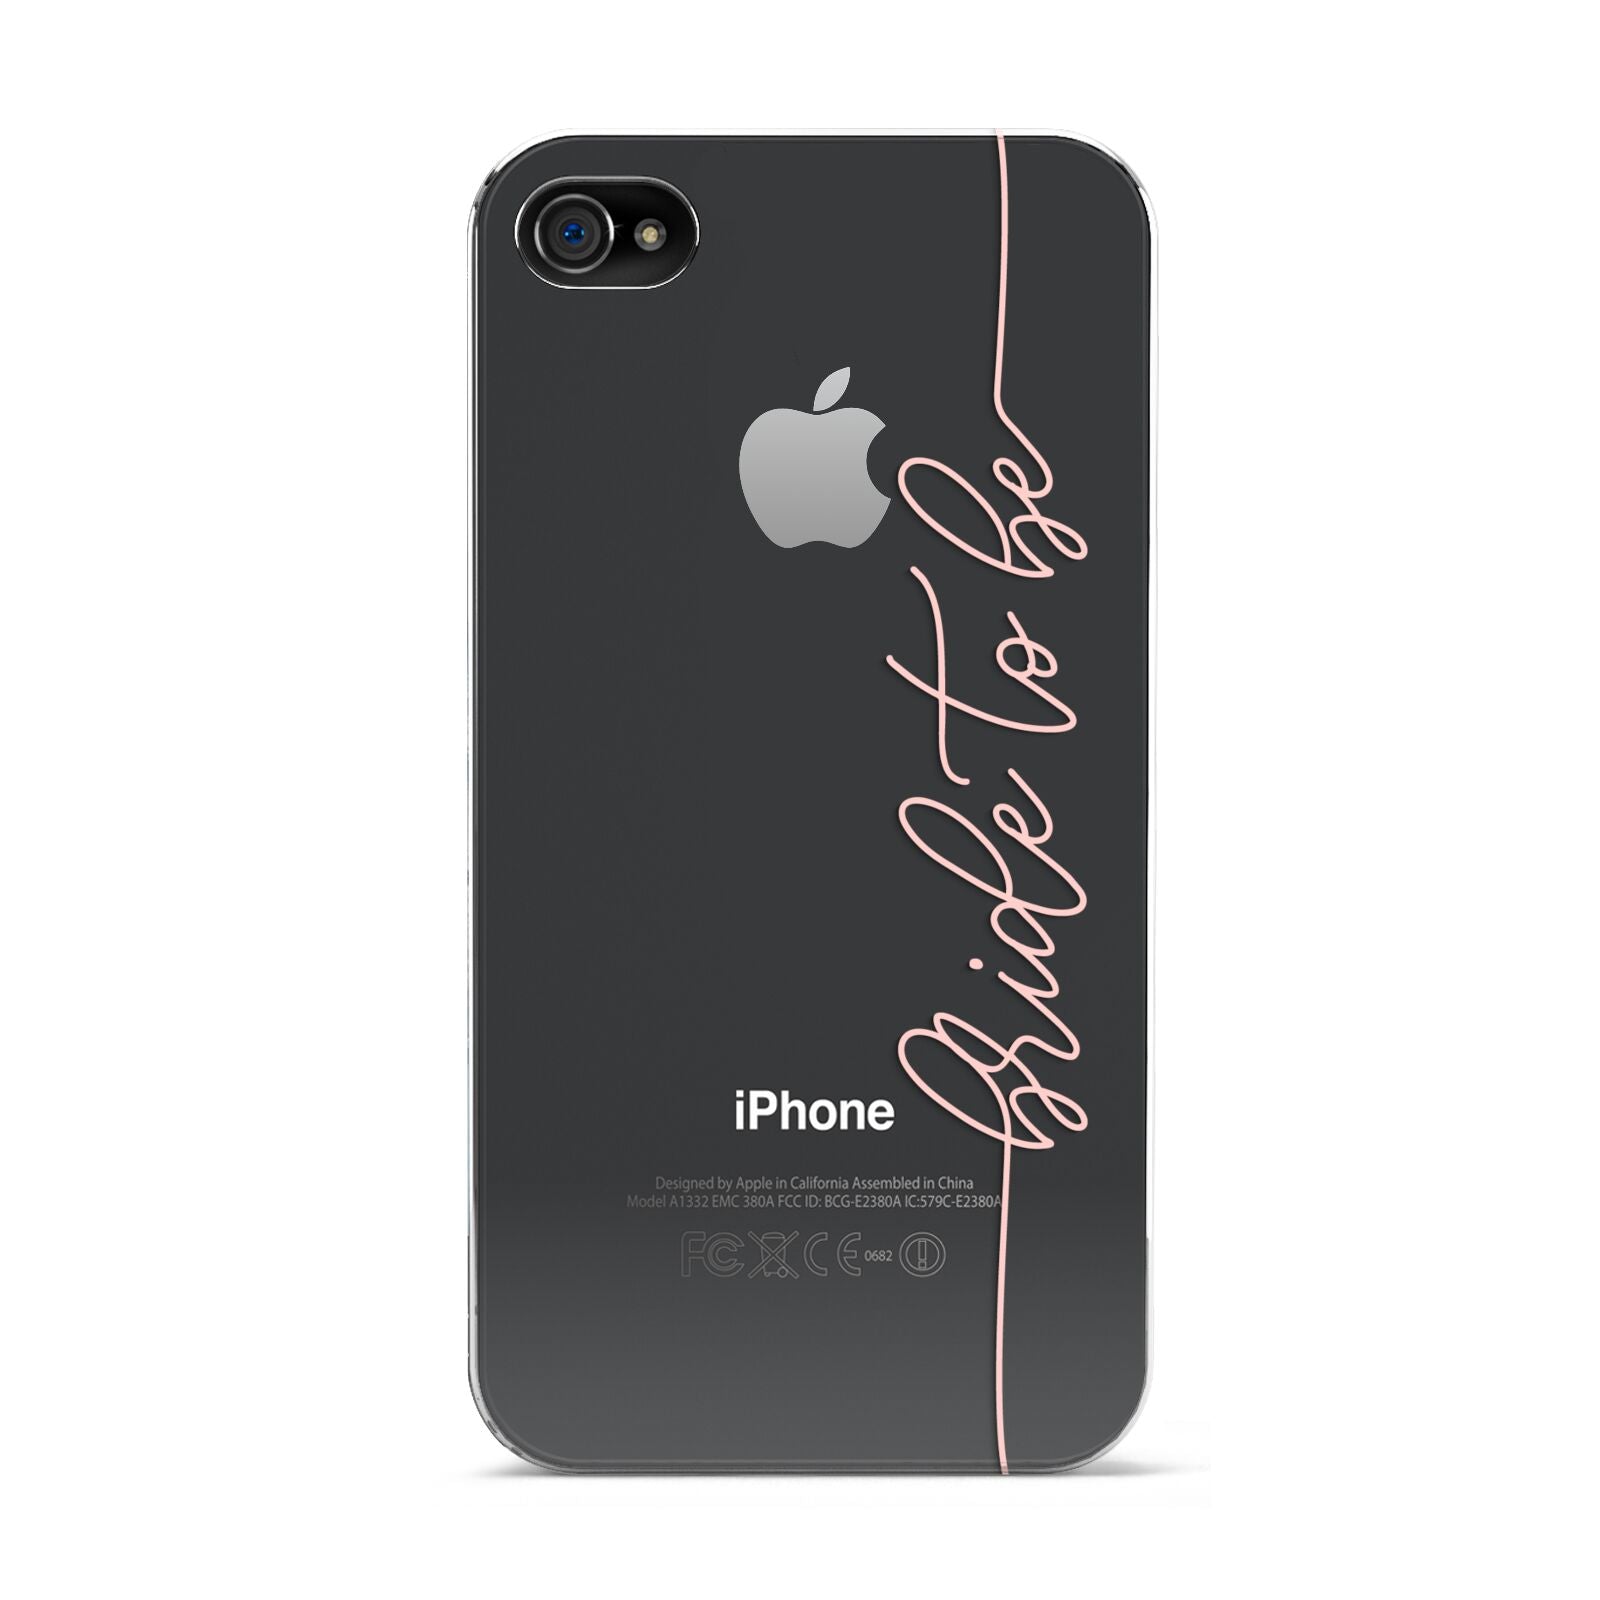 Bride To Be Apple iPhone 4s Case